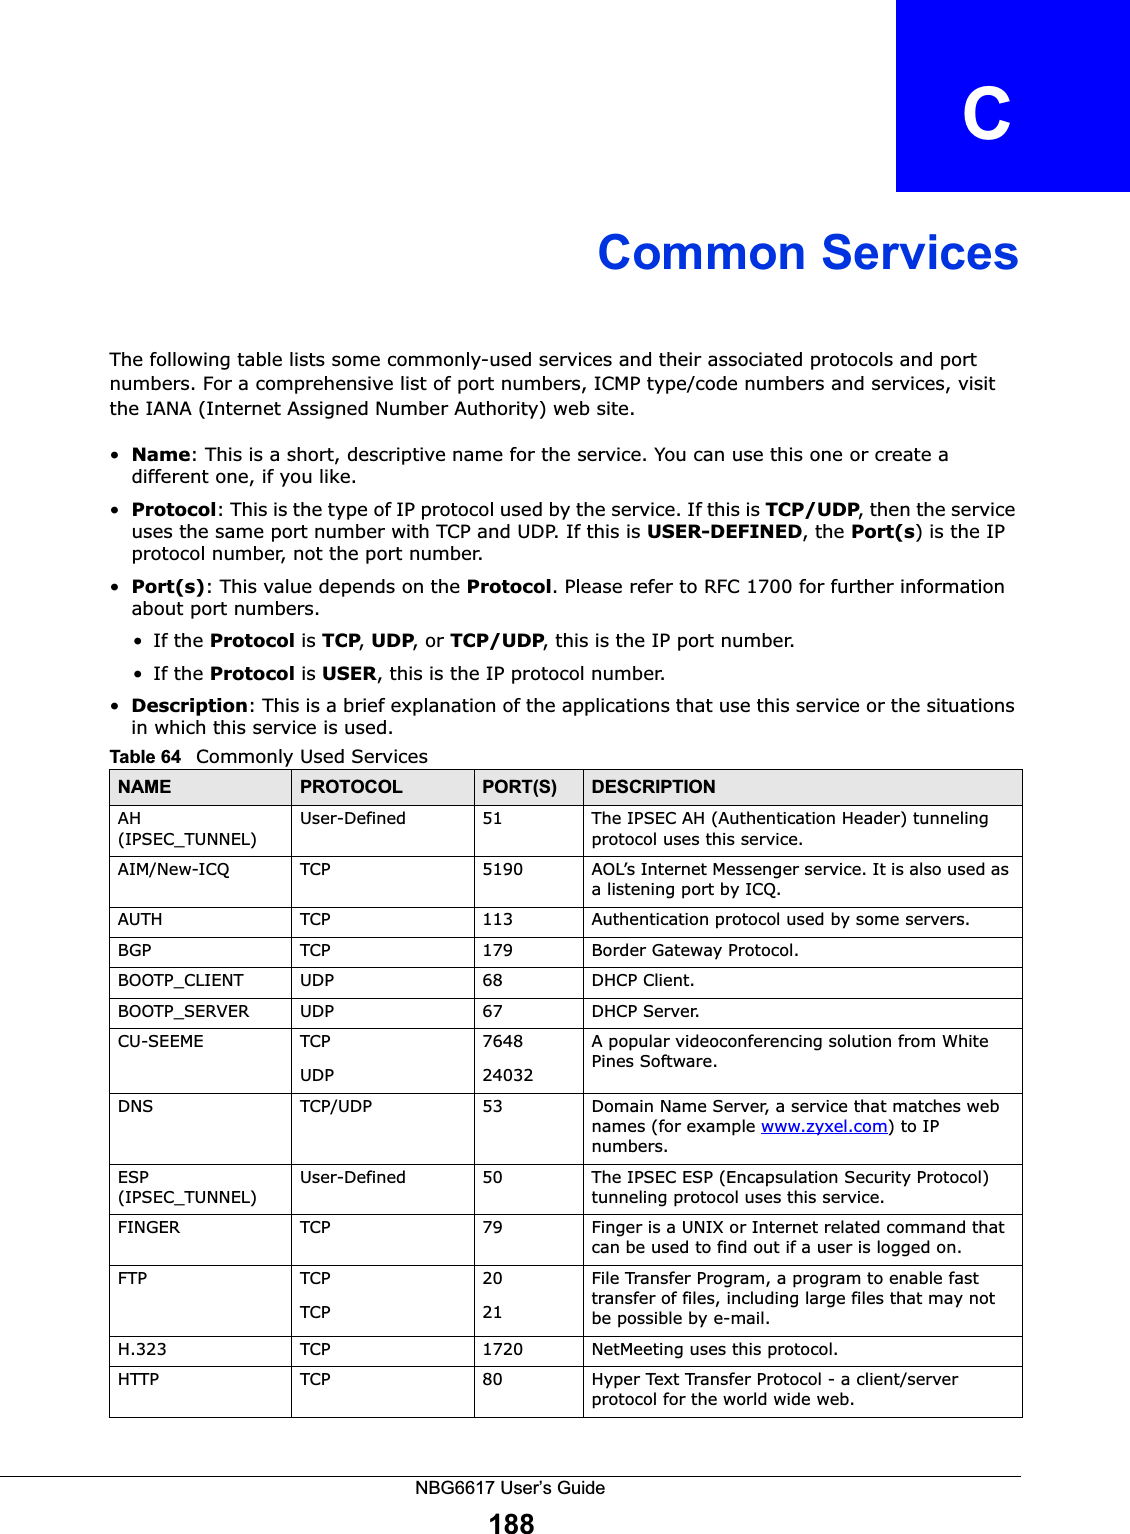 NBG6617 User’s Guide188APPENDIX   CCommon ServicesThe following table lists some commonly-used services and their associated protocols and port numbers. For a comprehensive list of port numbers, ICMP type/code numbers and services, visit the IANA (Internet Assigned Number Authority) web site. •Name: This is a short, descriptive name for the service. You can use this one or create a different one, if you like.•Protocol: This is the type of IP protocol used by the service. If this is TCP/UDP, then the service uses the same port number with TCP and UDP. If this is USER-DEFINED, the Port(s) is the IP protocol number, not the port number.•Port(s): This value depends on the Protocol. Please refer to RFC 1700 for further information about port numbers.•If the Protocol is TCP, UDP, or TCP/UDP, this is the IP port number.•If the Protocol is USER, this is the IP protocol number.•Description: This is a brief explanation of the applications that use this service or the situations in which this service is used.Table 64   Commonly Used ServicesNAME PROTOCOL PORT(S) DESCRIPTIONAH (IPSEC_TUNNEL)User-Defined 51 The IPSEC AH (Authentication Header) tunneling protocol uses this service.AIM/New-ICQ TCP 5190 AOL’s Internet Messenger service. It is also used as a listening port by ICQ.AUTH TCP 113 Authentication protocol used by some servers.BGP TCP 179 Border Gateway Protocol.BOOTP_CLIENT UDP 68 DHCP Client.BOOTP_SERVER UDP 67 DHCP Server.CU-SEEME TCPUDP764824032A popular videoconferencing solution from White Pines Software.DNS TCP/UDP 53 Domain Name Server, a service that matches web names (for example www.zyxel.com) to IP numbers.ESP (IPSEC_TUNNEL)User-Defined 50 The IPSEC ESP (Encapsulation Security Protocol) tunneling protocol uses this service.FINGER TCP 79 Finger is a UNIX or Internet related command that can be used to find out if a user is logged on.FTP TCPTCP2021File Transfer Program, a program to enable fast transfer of files, including large files that may not be possible by e-mail.H.323 TCP 1720 NetMeeting uses this protocol.HTTP TCP 80 Hyper Text Transfer Protocol - a client/server protocol for the world wide web.